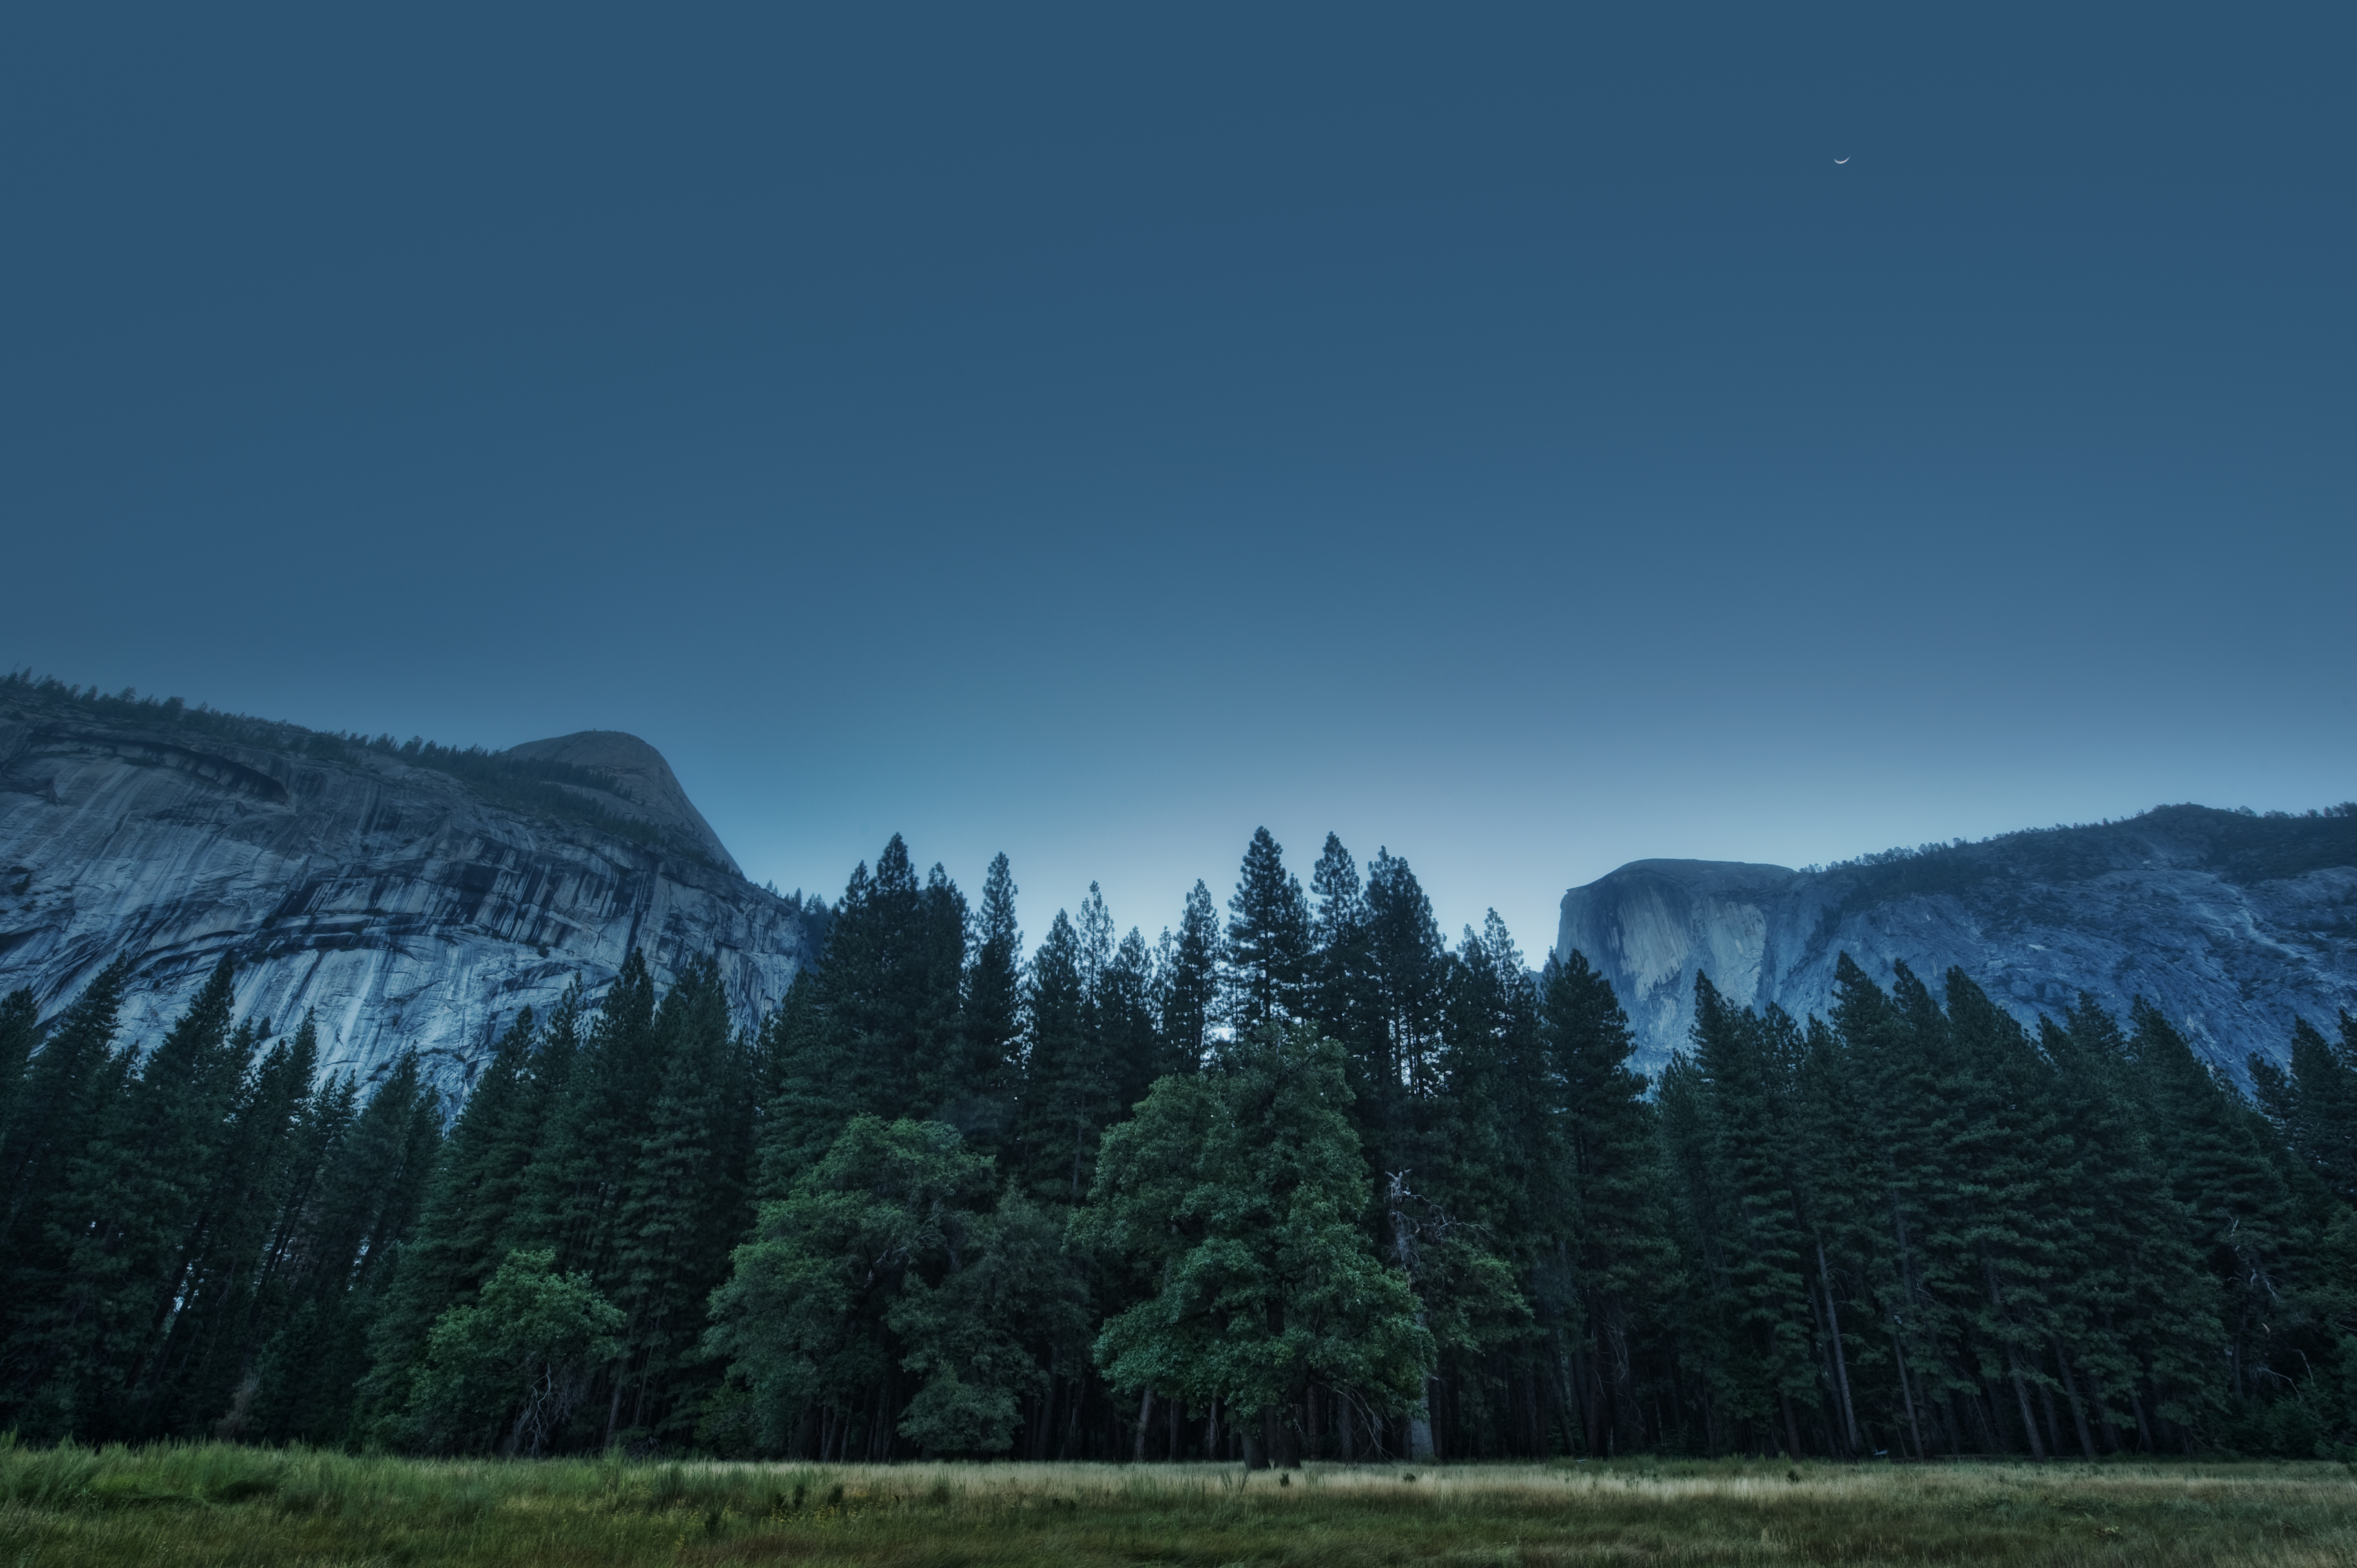 Full HD Wallpaper national park, nature, trees, mountains, usa, forest, united states, california state, california, yosemite valley